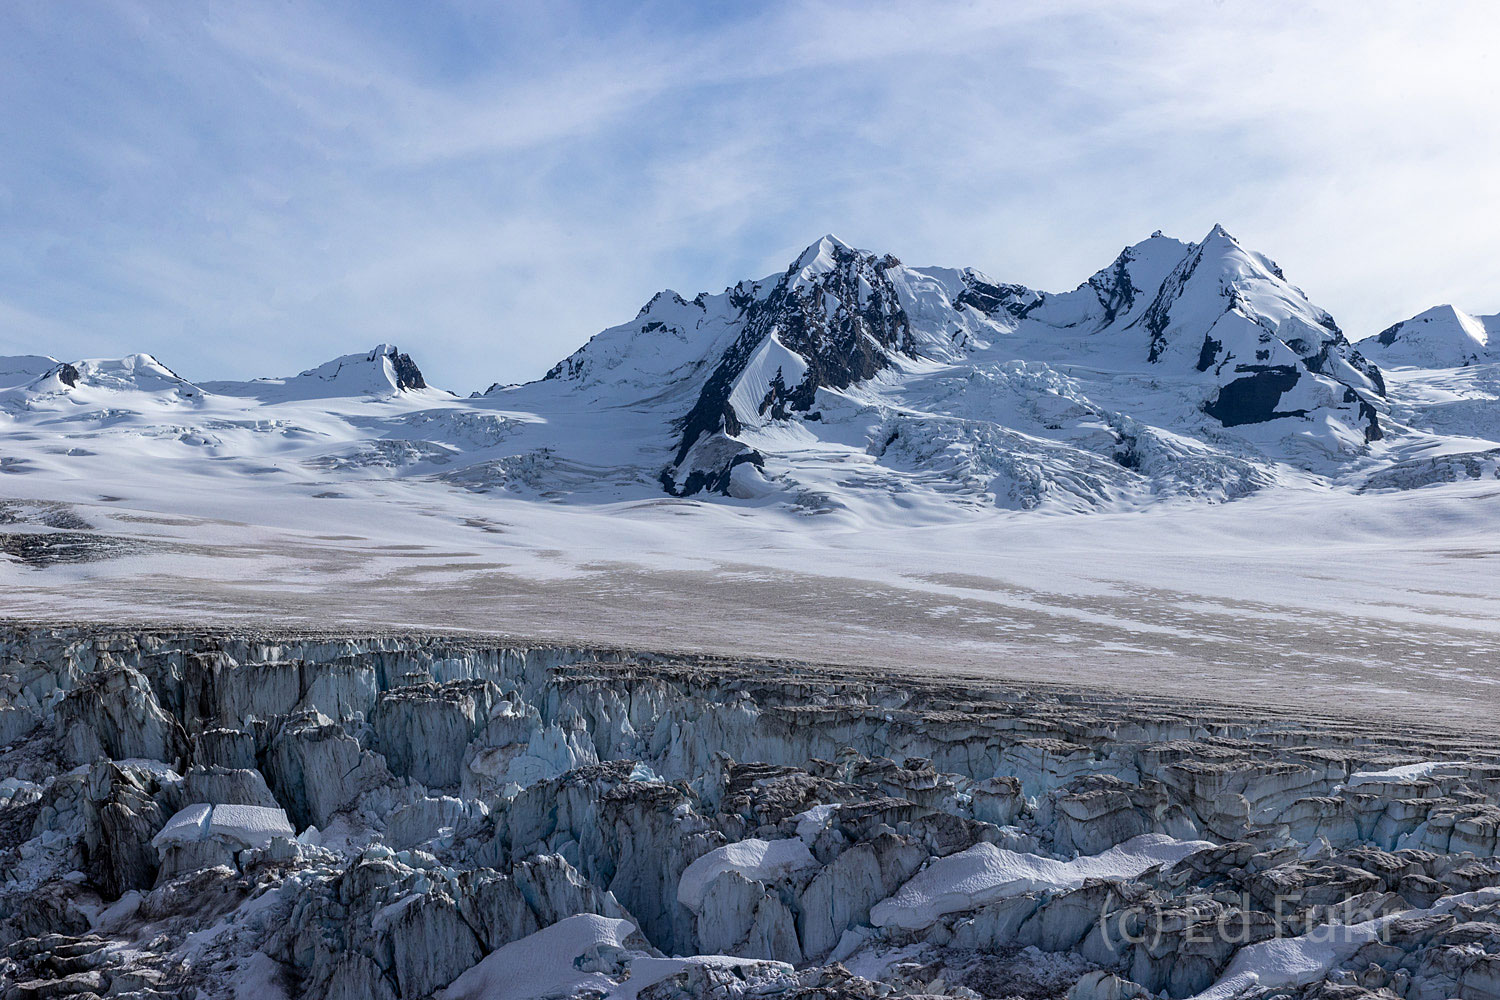 The massive Bagley Icefield is 127 miles long, 6 miles wide and up to 3000 feet thick!